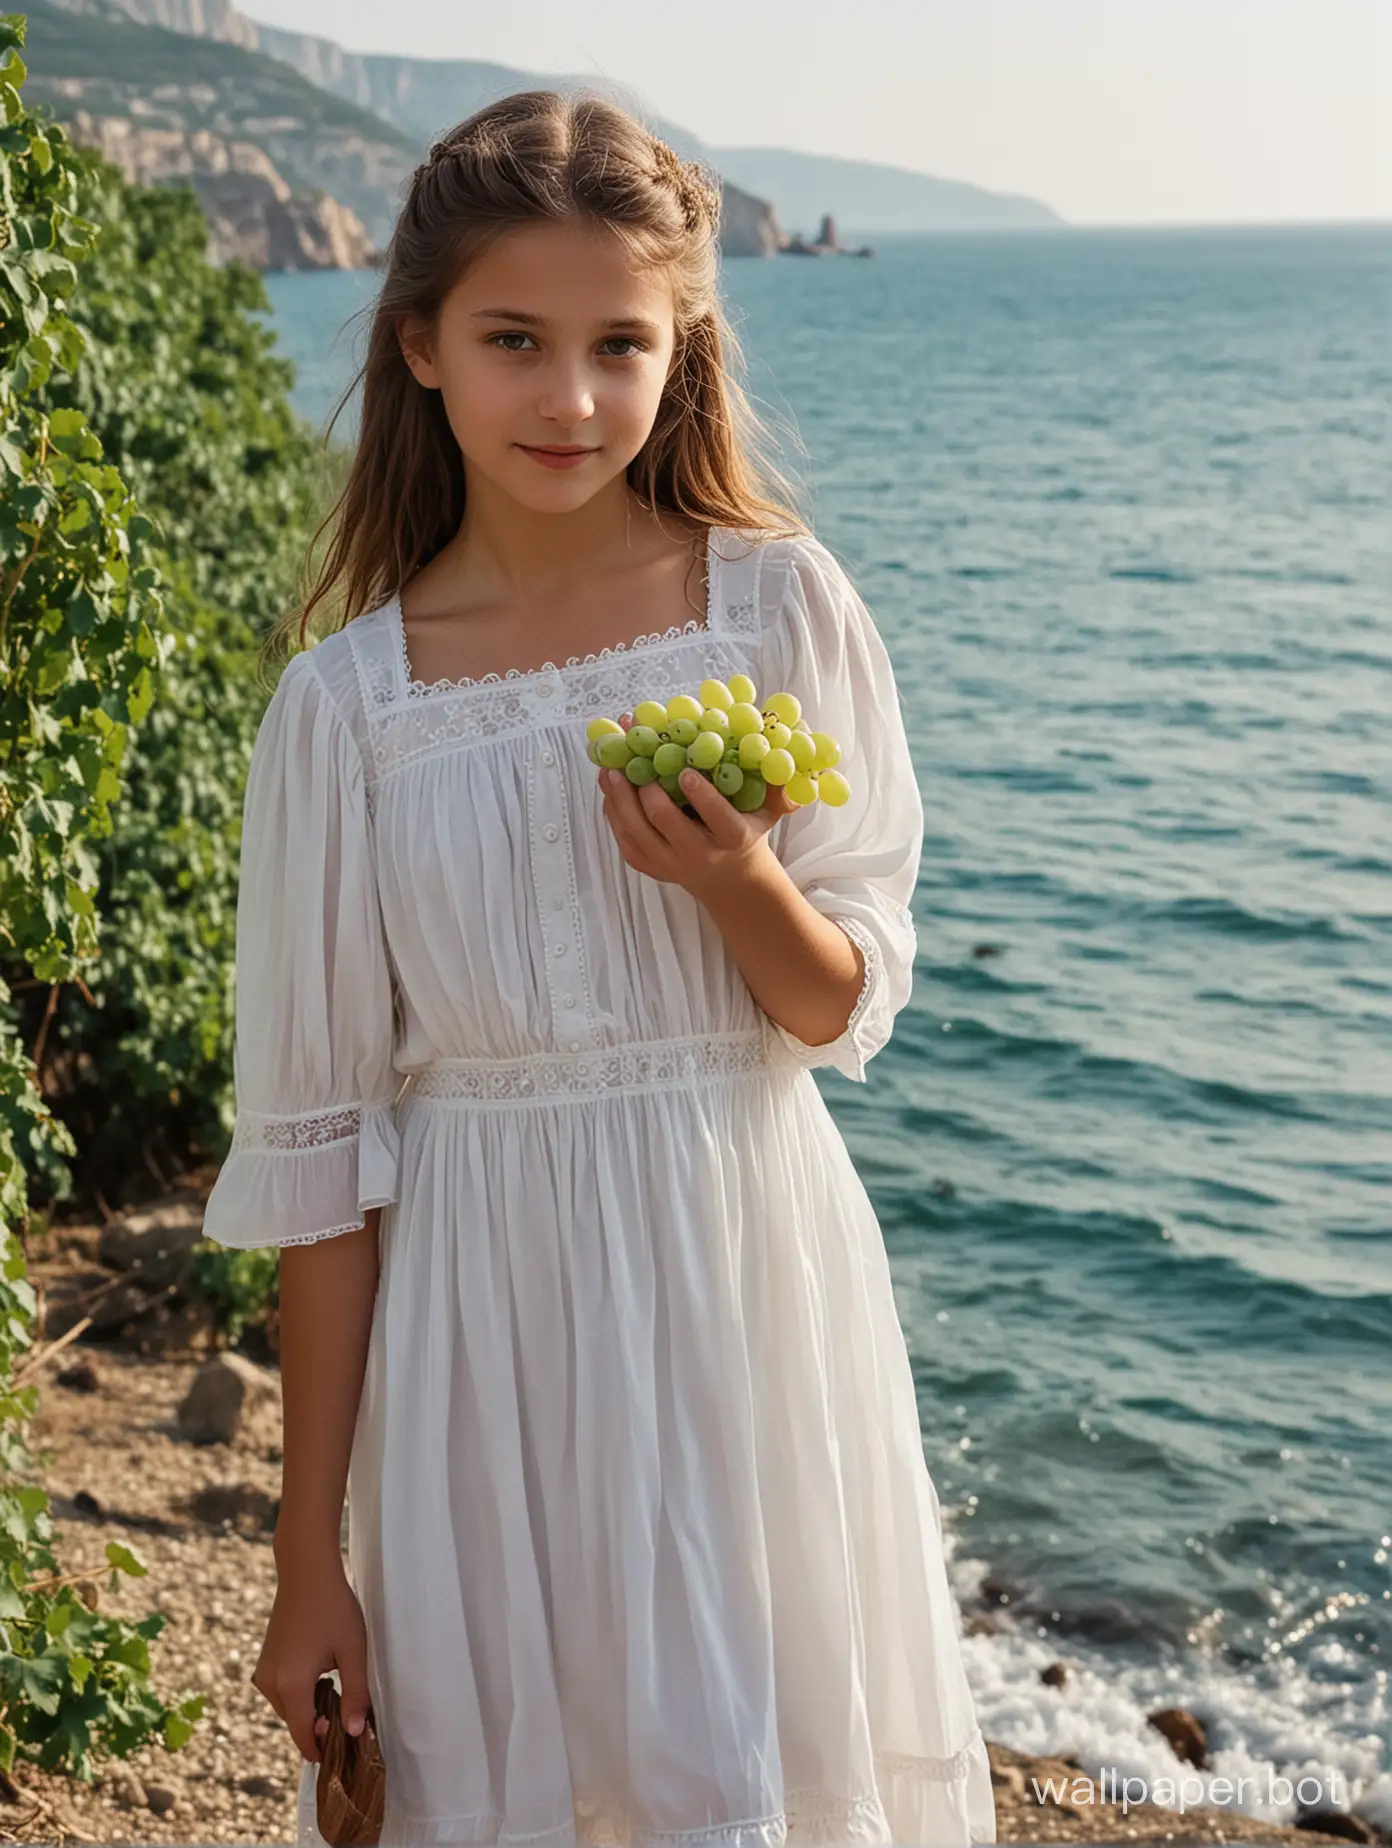 Girl-Holding-Grapes-by-the-Sea-in-Crimea